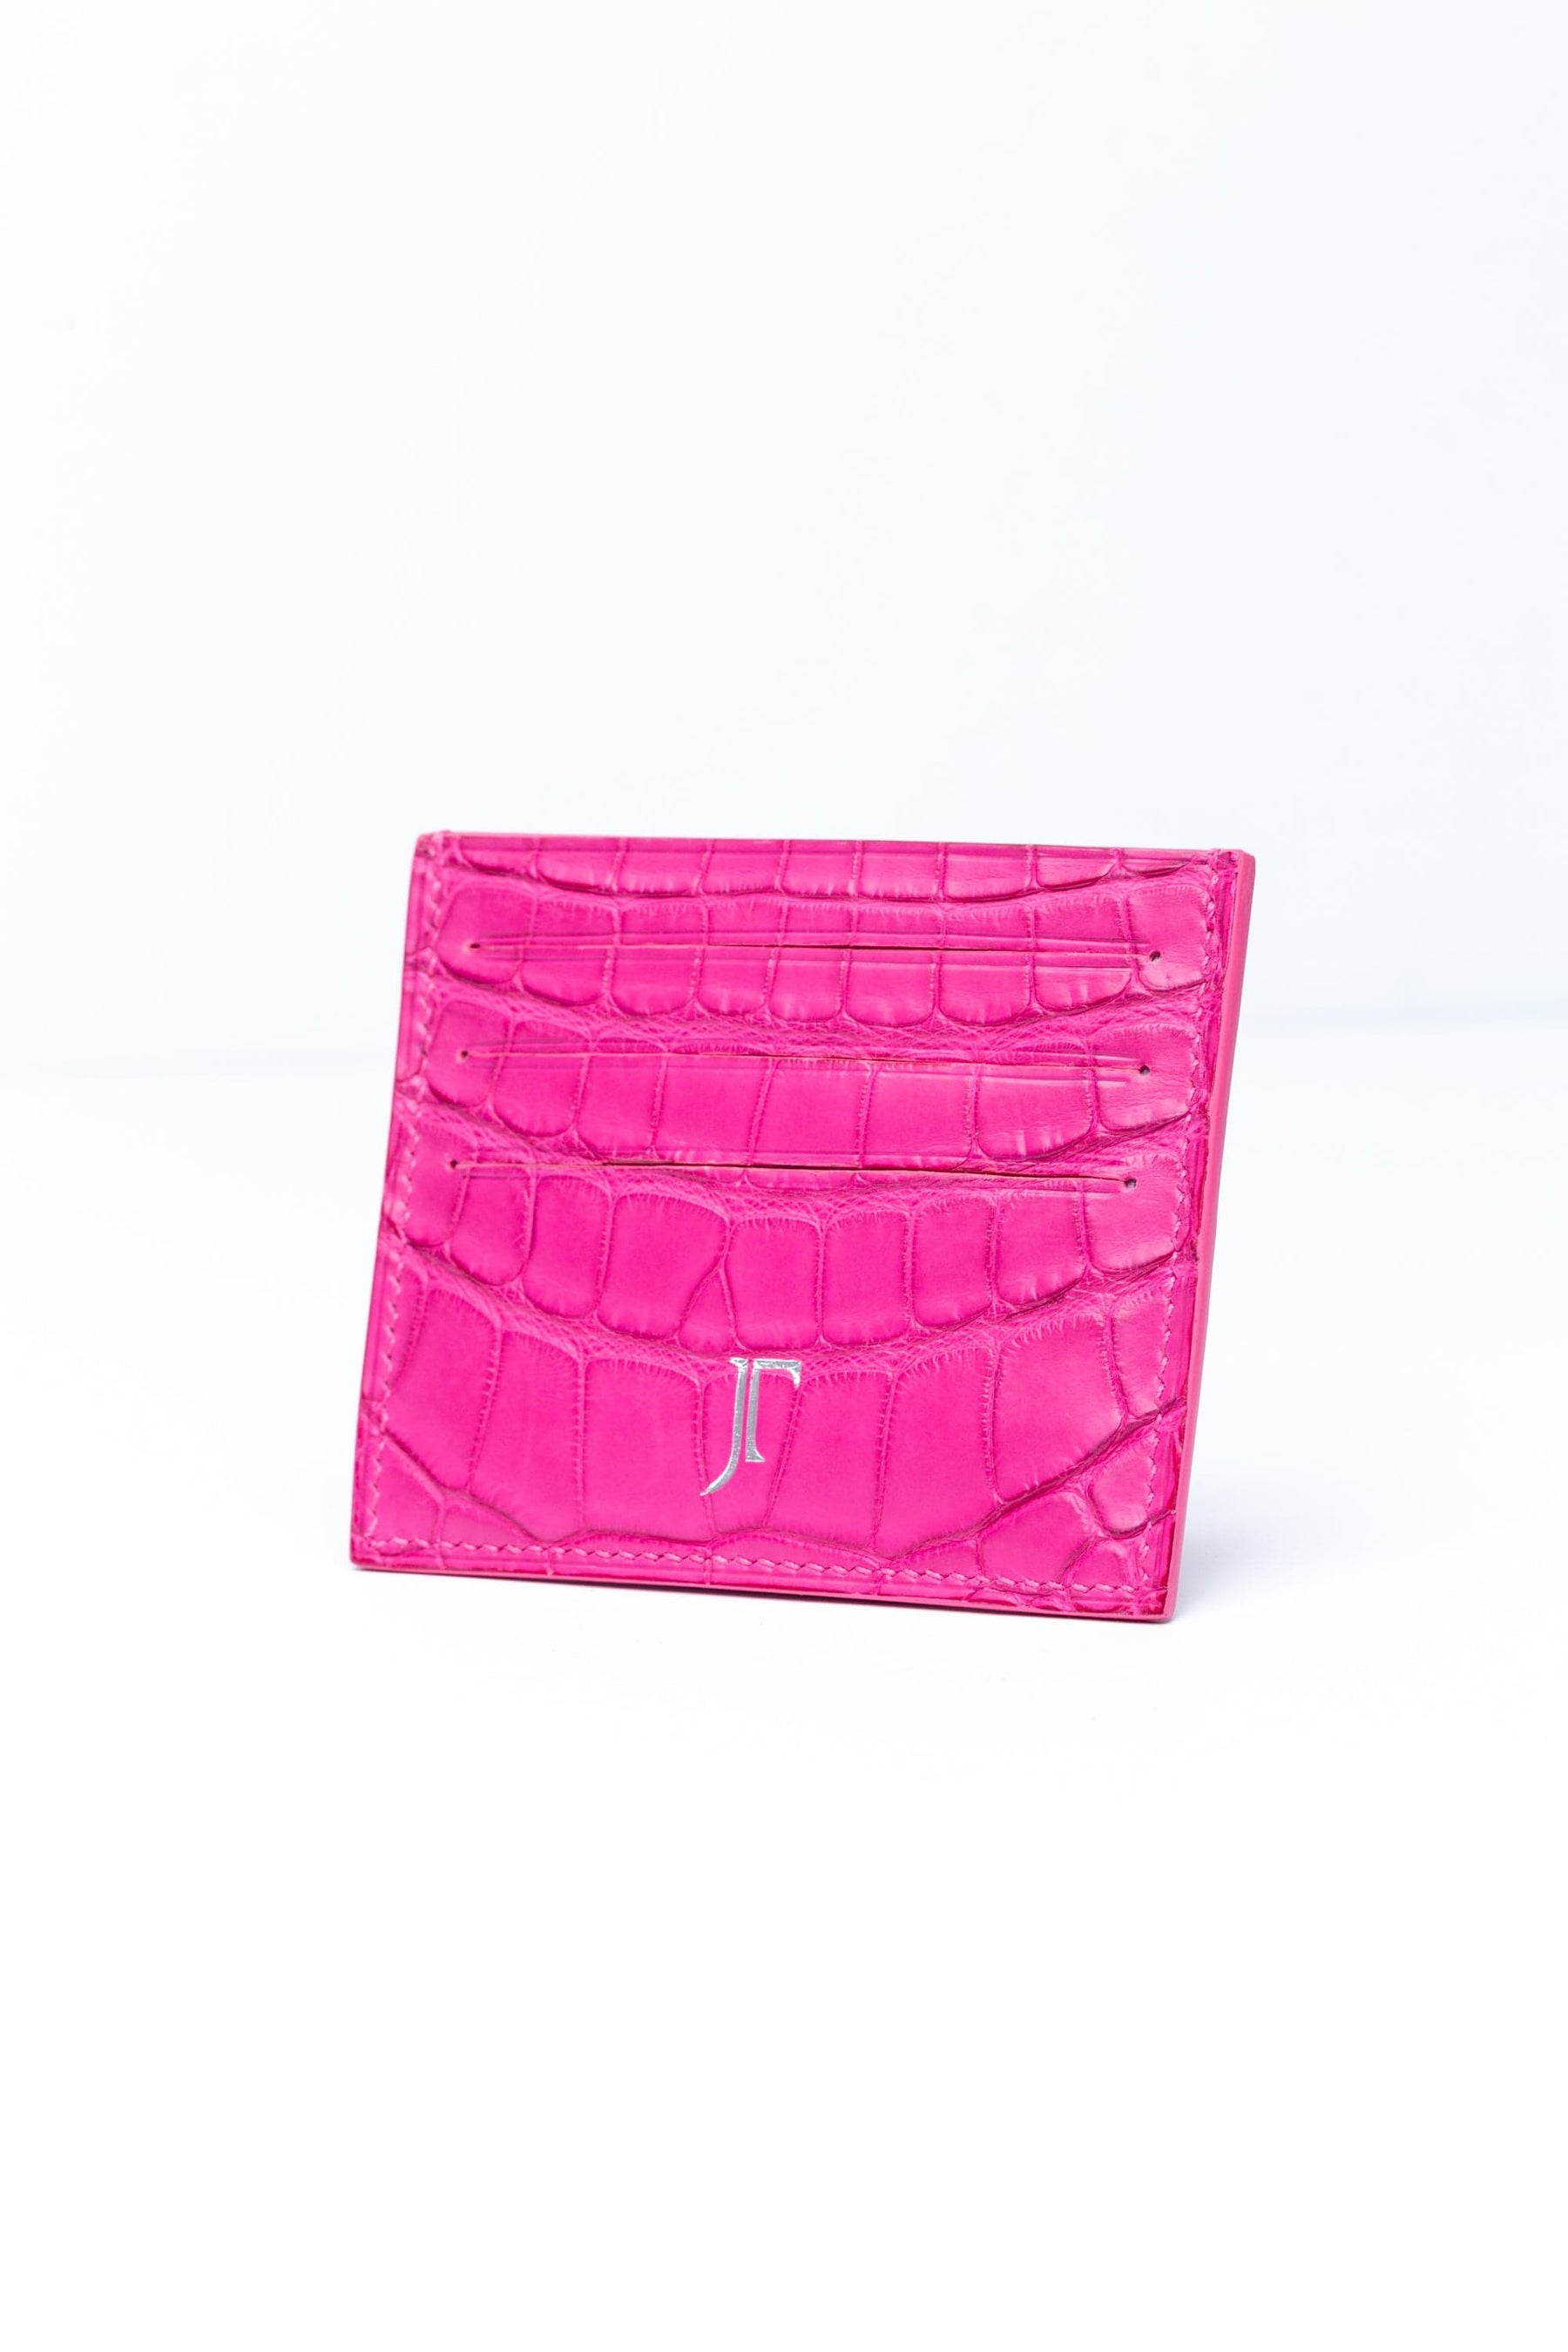 Tamagini Leather Bungus Card | Pink Hot Wallet The Endicott Edition 